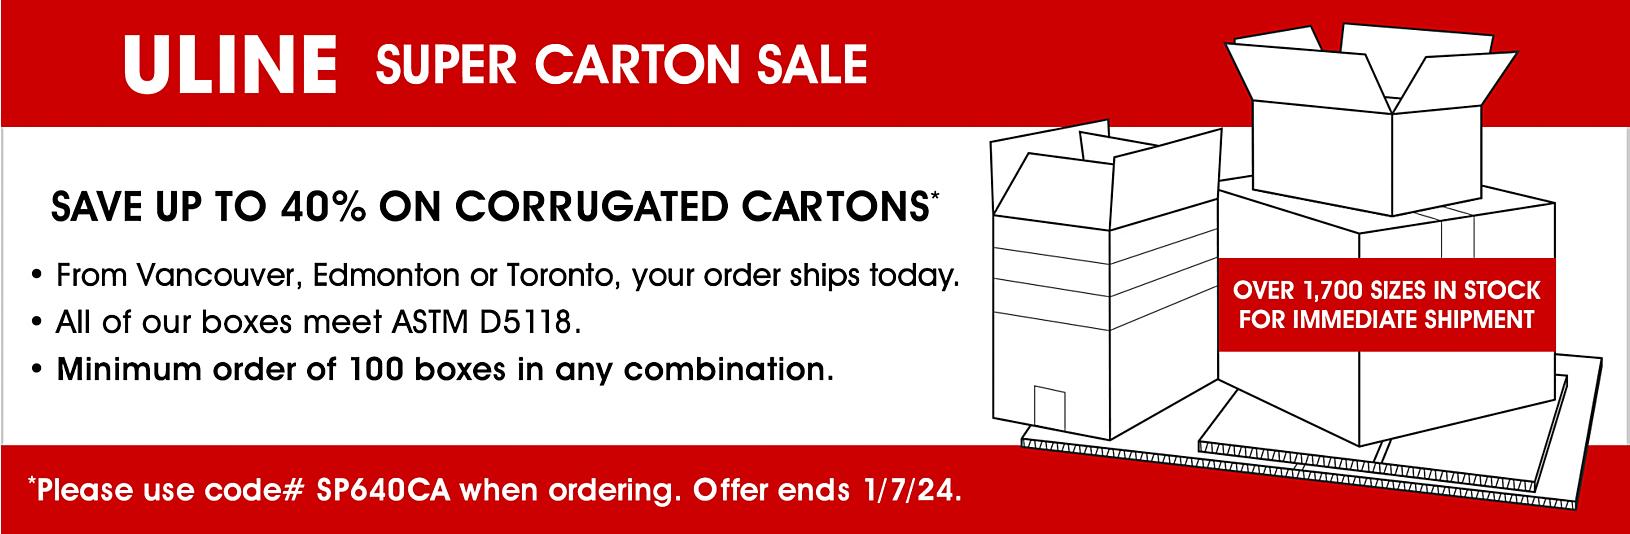 Super Carton Sale - Save up to 40% on Corrugated Cartons. Please use code# SP640CA when ordering. Offer ends 1/7/24.